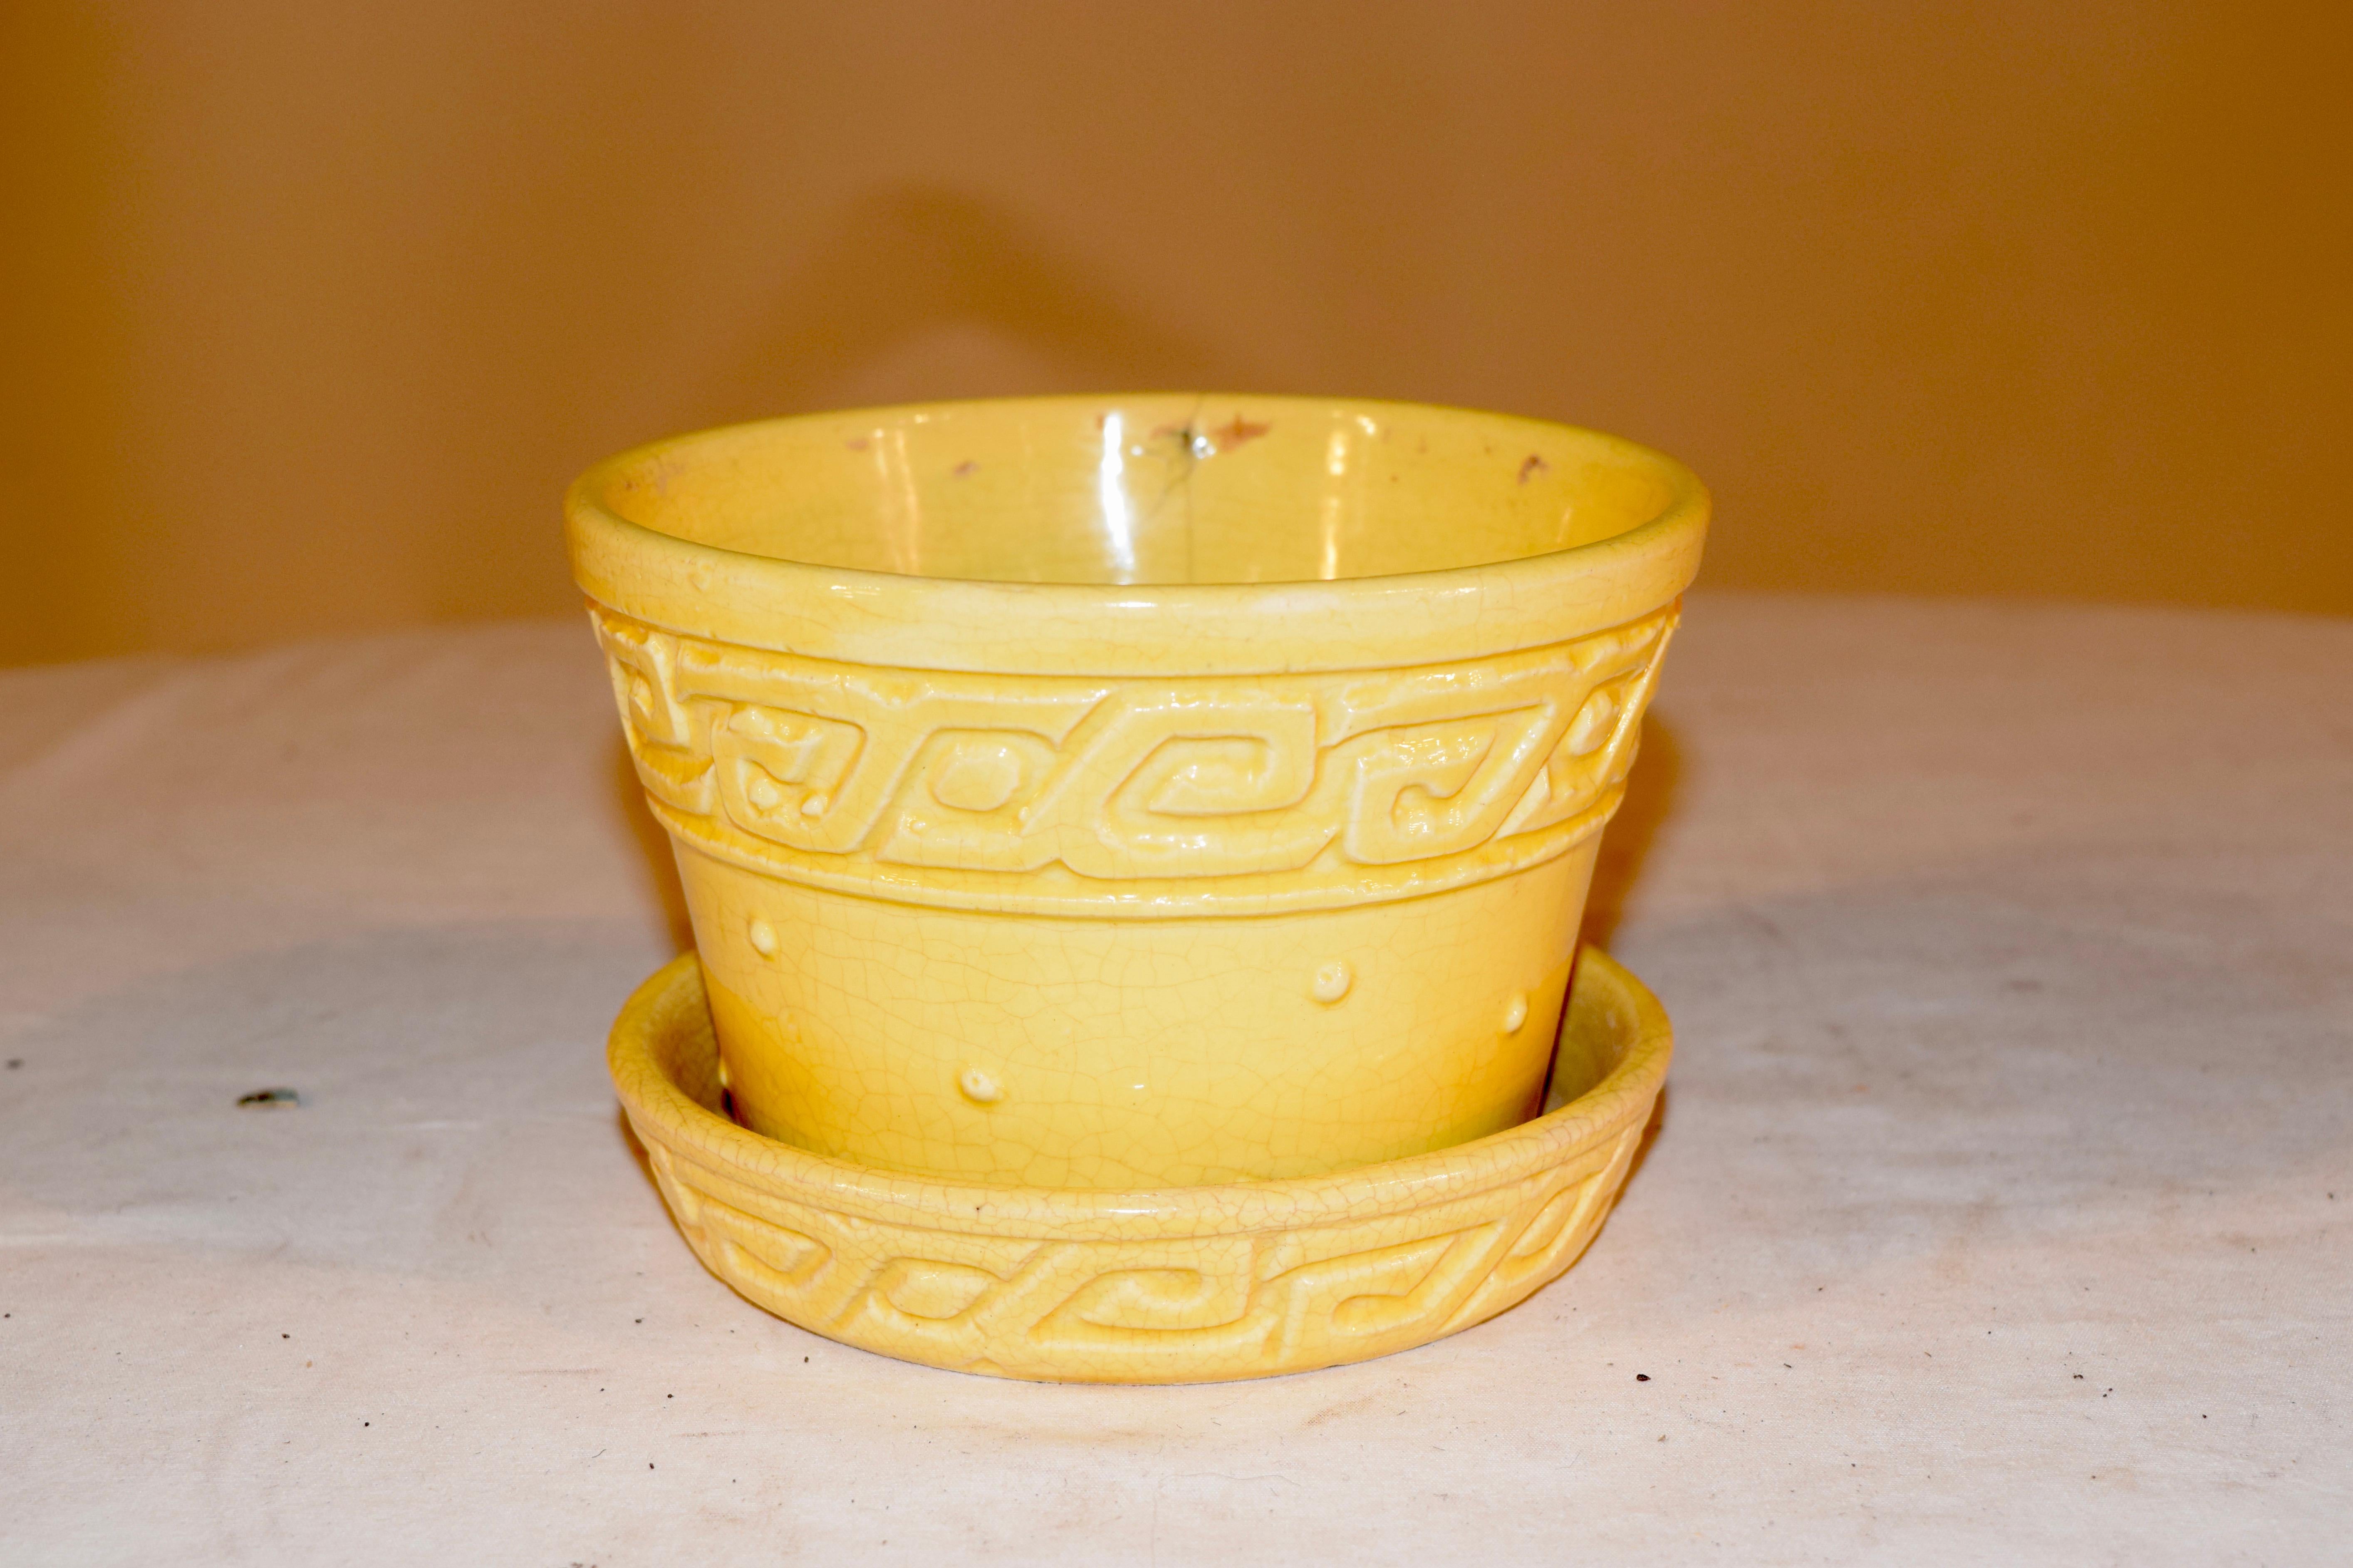 An original vintage 1950s McCoy ceramic planter. This midcentury piece is from the 1950s. A charming ceramic pot with Greek key design around the top rim and also on the attached saucer with yellow hues.